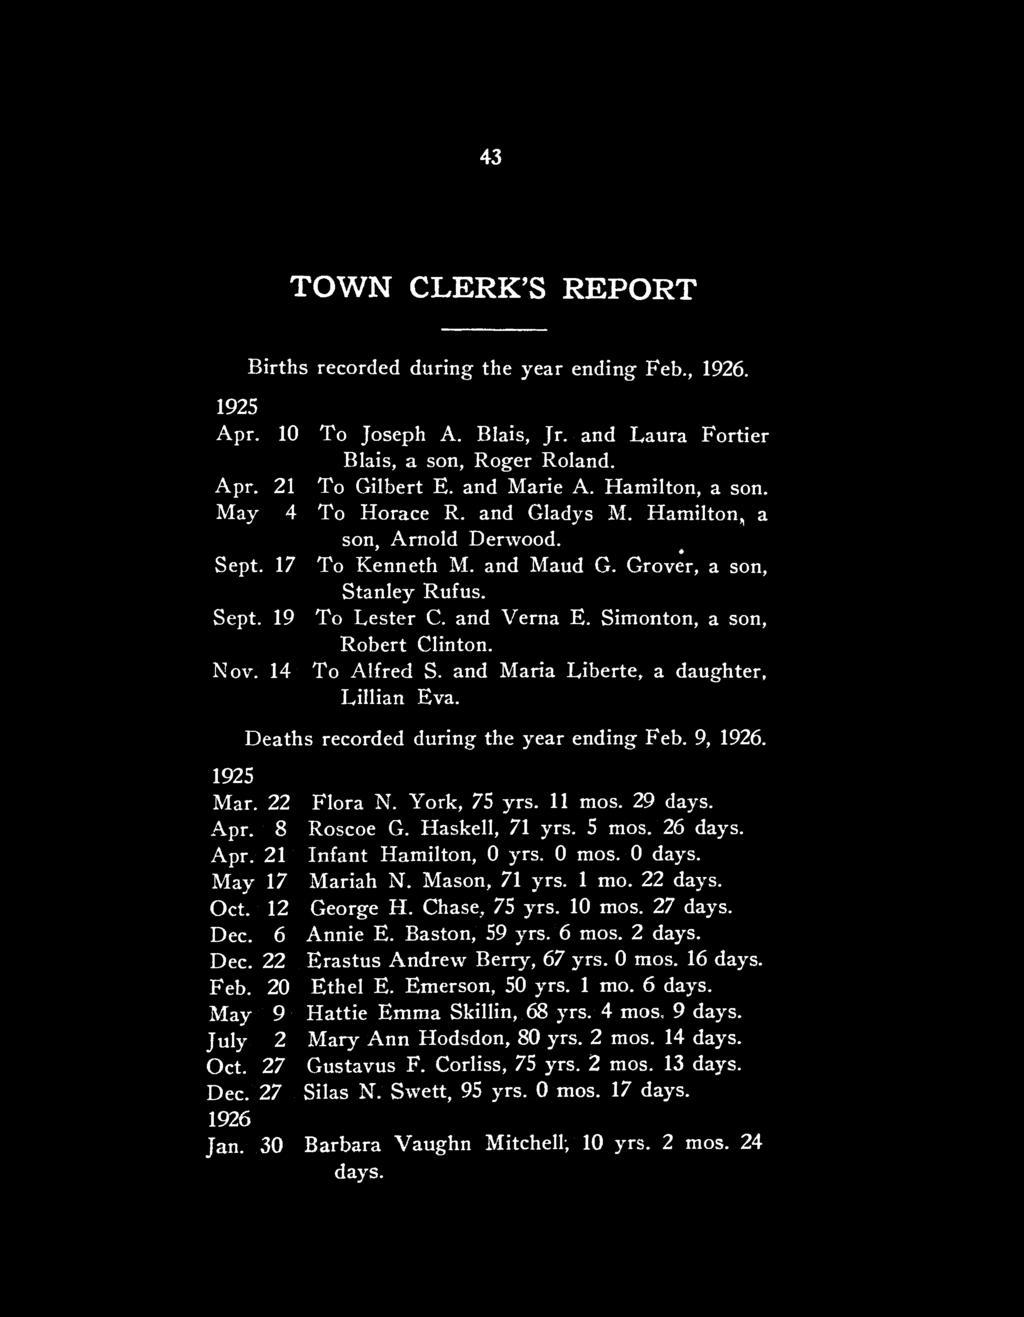 43 TOWN CLERK'S REPORT Births recorded during the year ending Feb., 1926. 1925 Apr. 10 To Joseph A. Blais, Jr. and Laura Fortier Blais, a son, Roger Roland. Apr. 21 To Gilbert E. and Marie A.